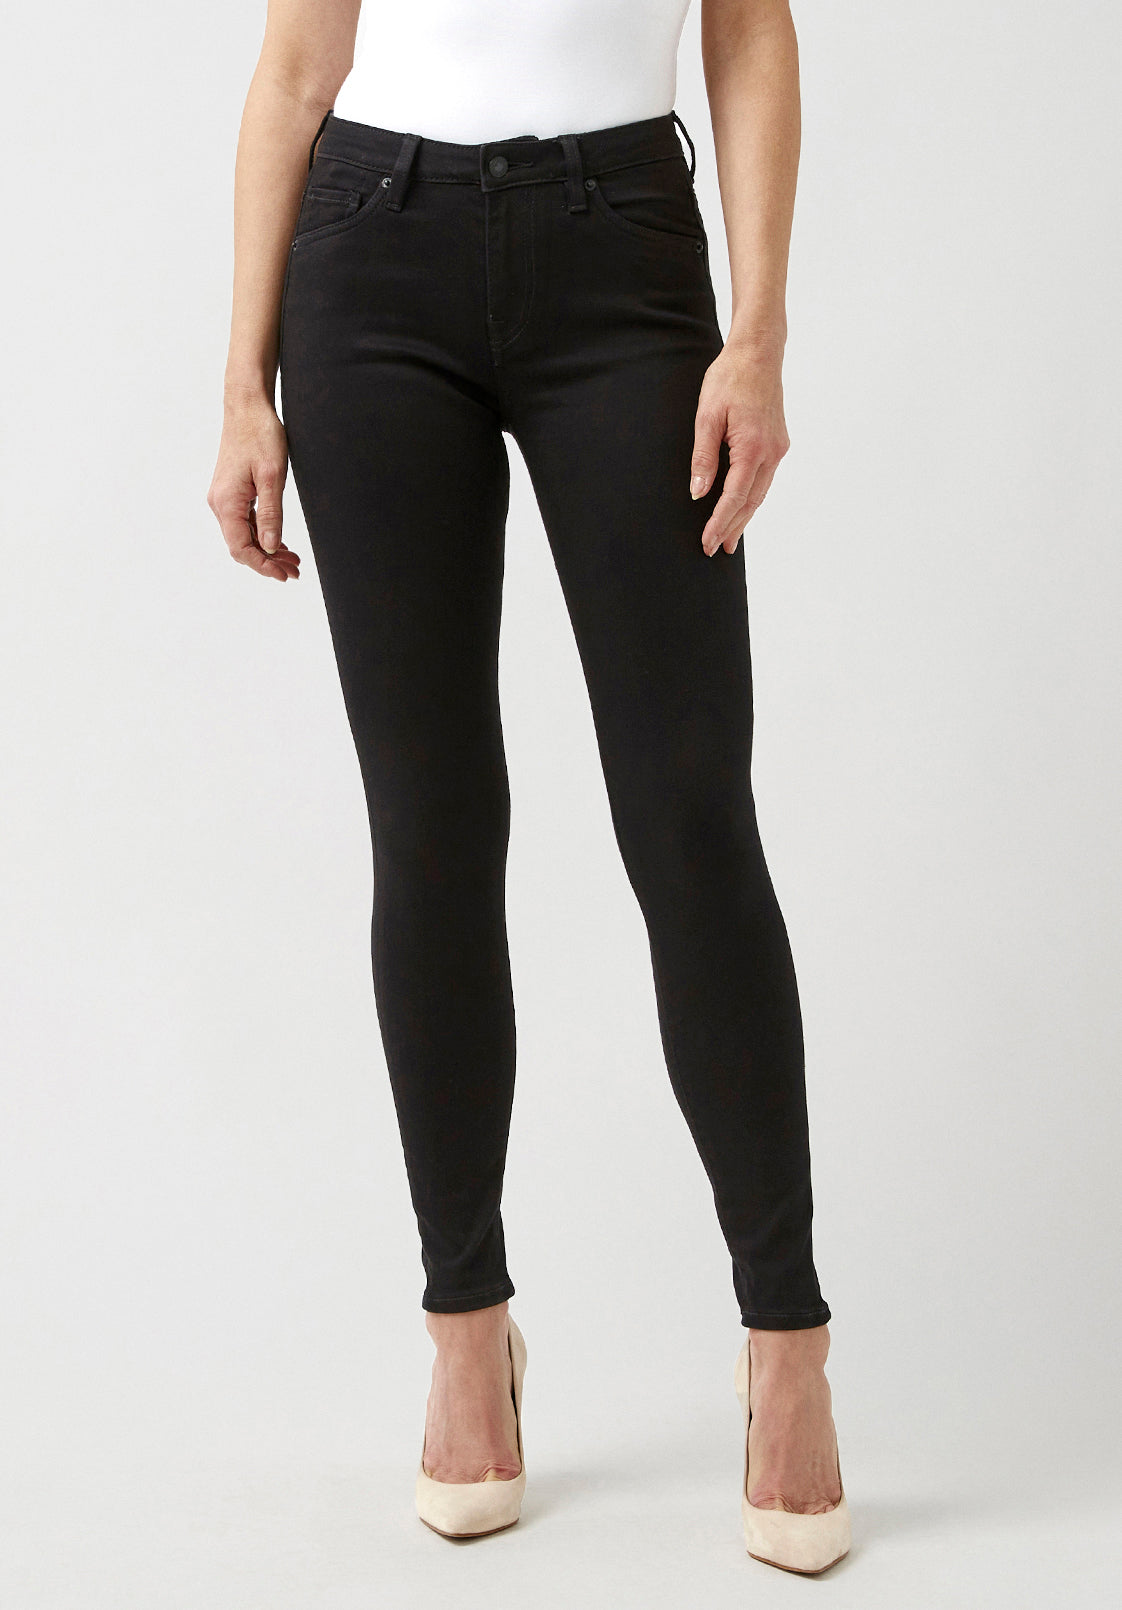 High Rise Jessie Women's Pleather Pants in Black - BL15851